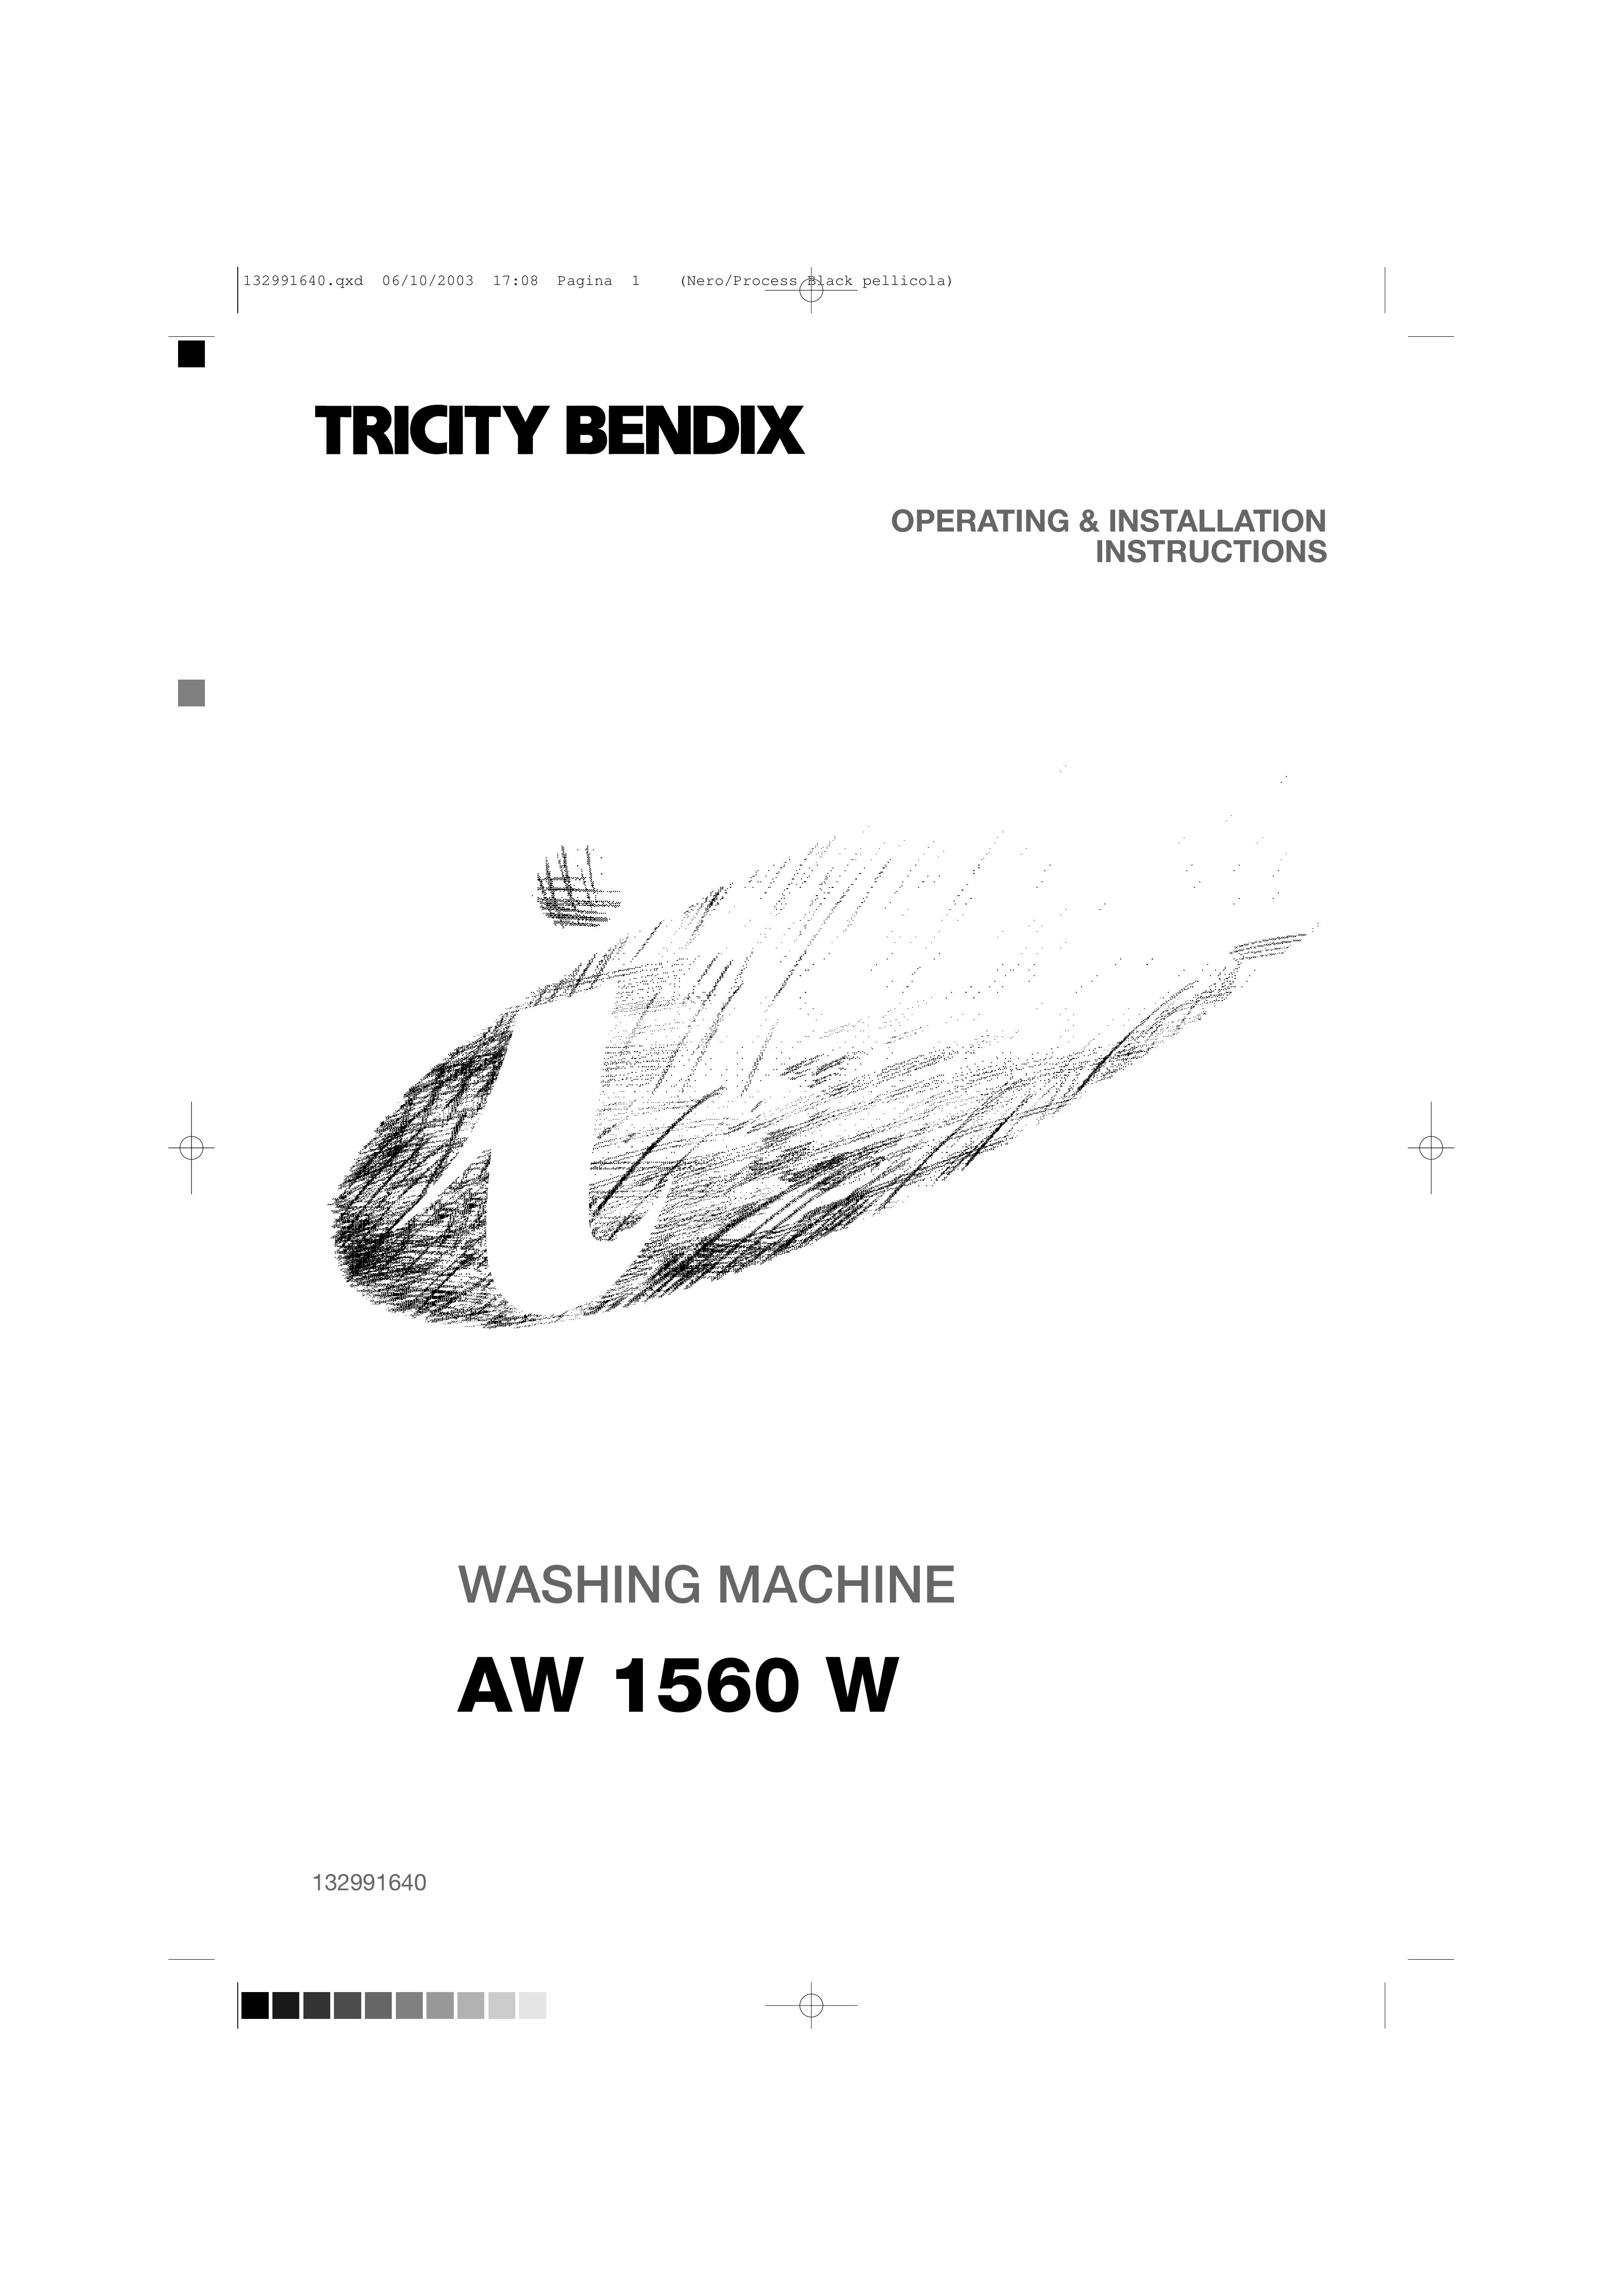 Tricity Bendix AW 1560 W Washer/Dryer User Manual